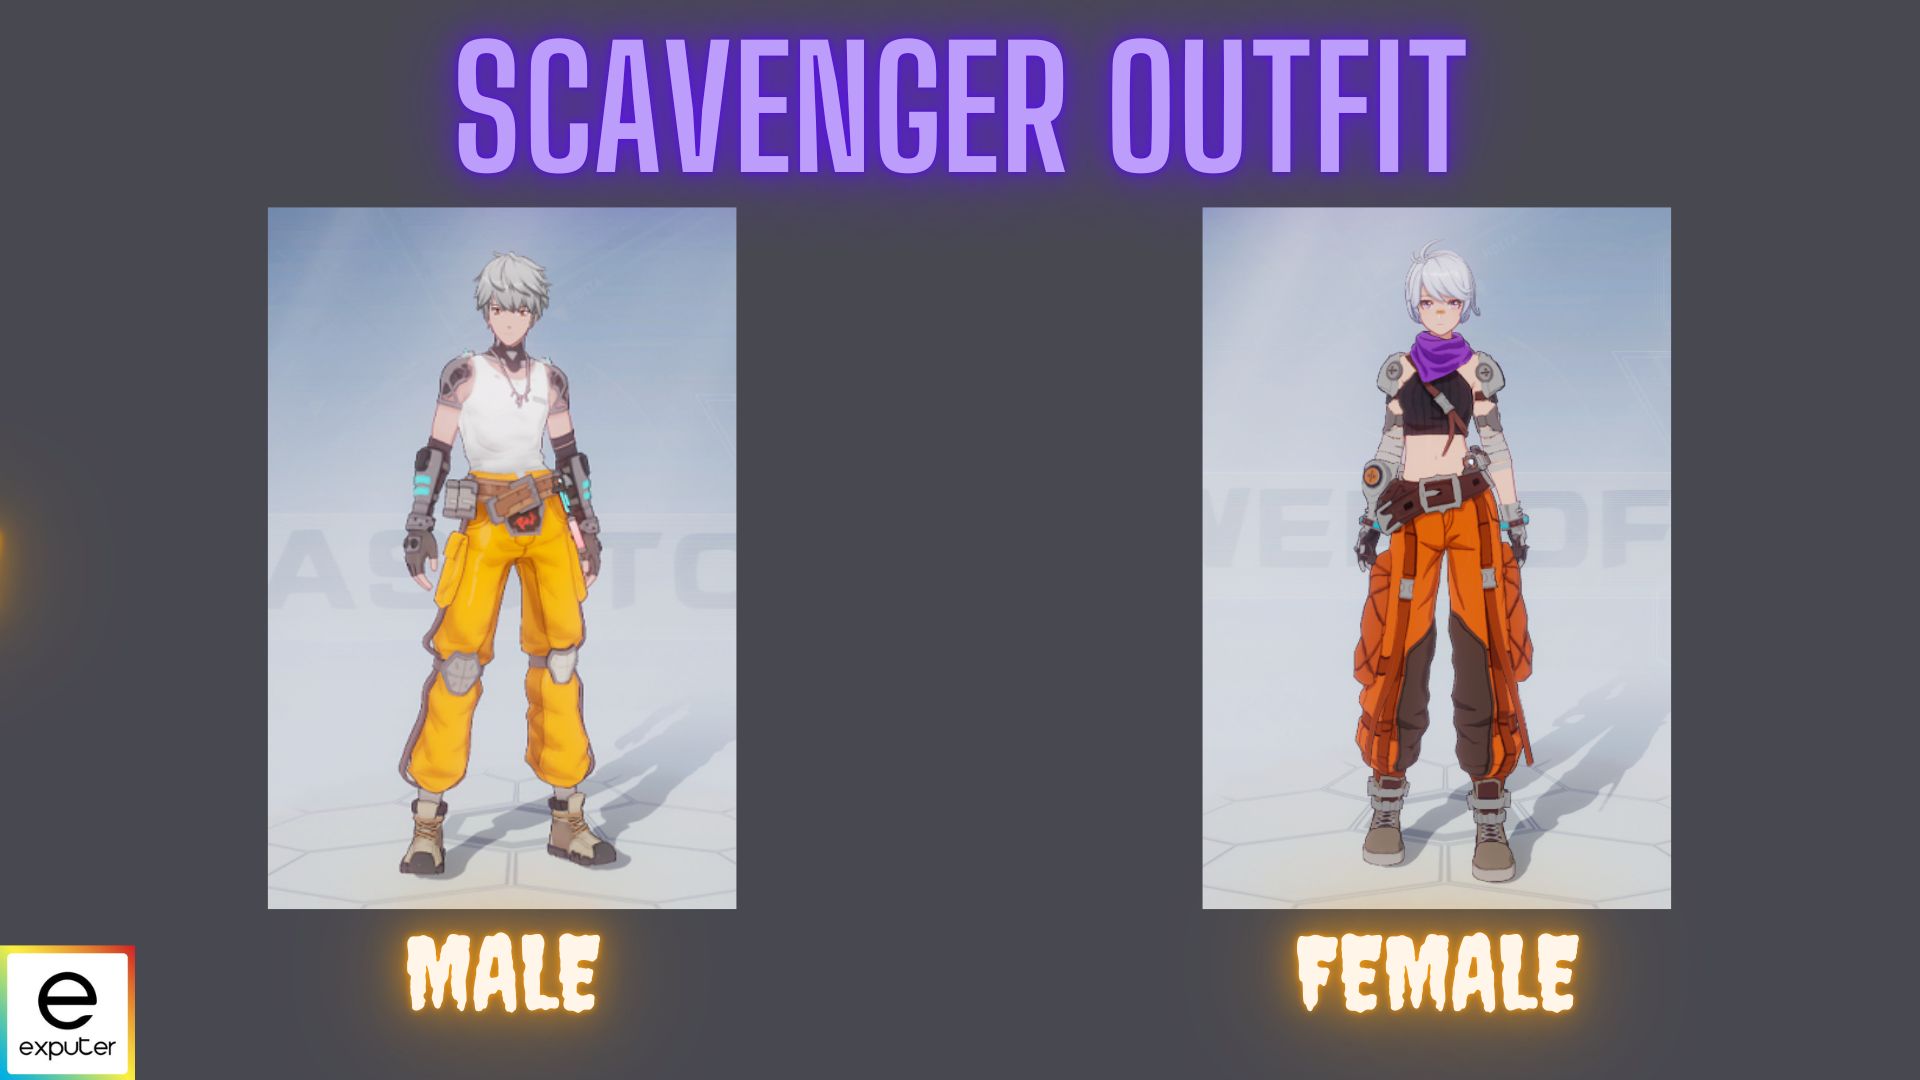 Scavenger outfit how to get